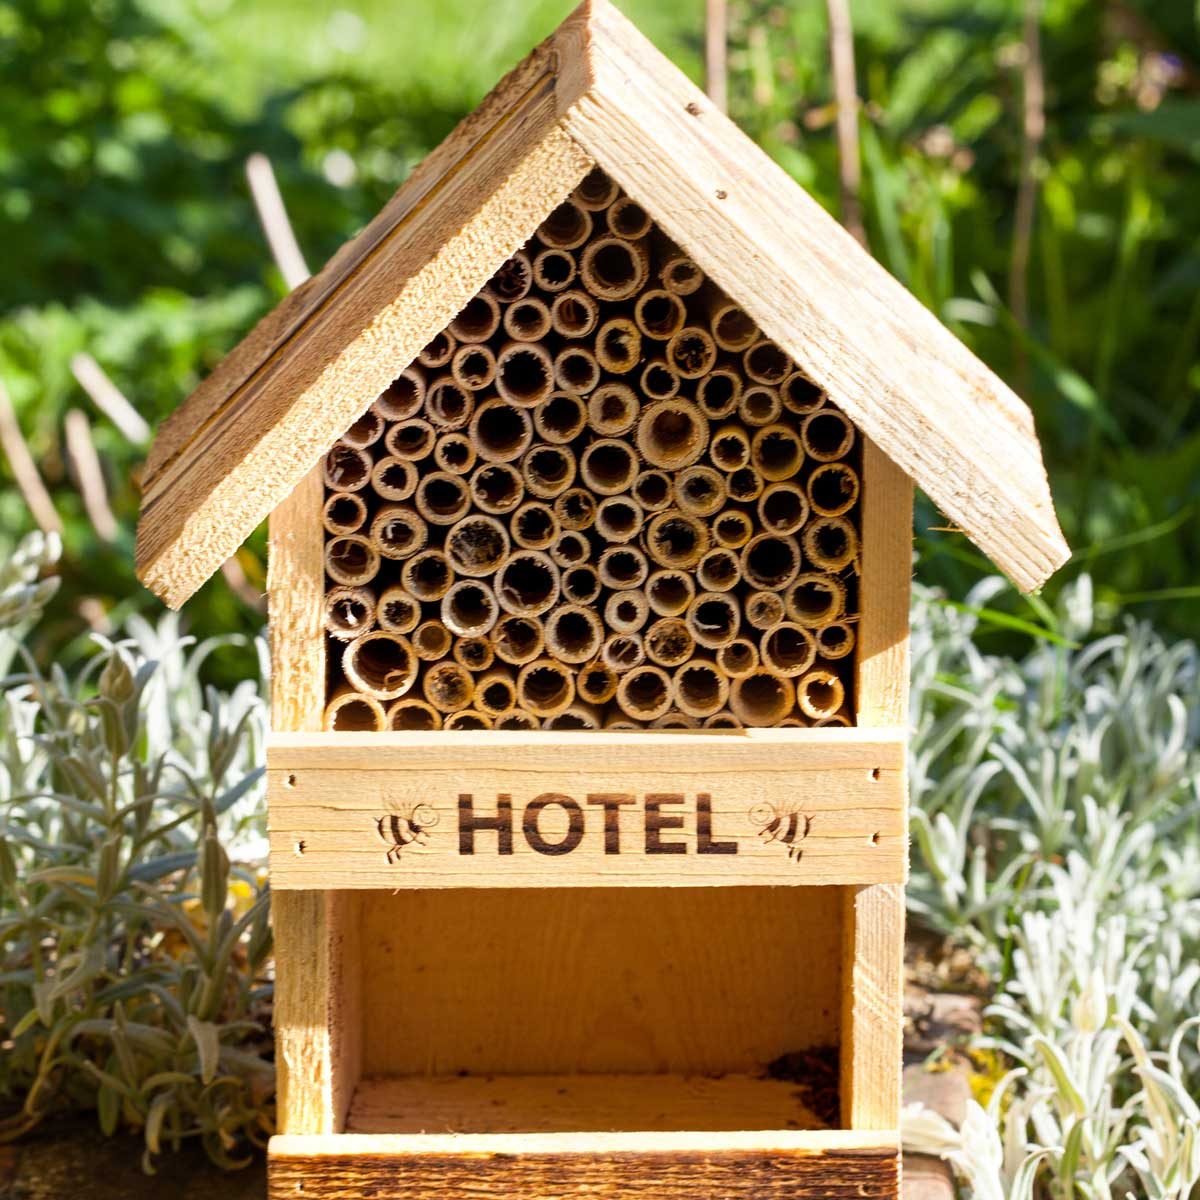 9 Best Bug Hotels of 2022 | The Family Handyman